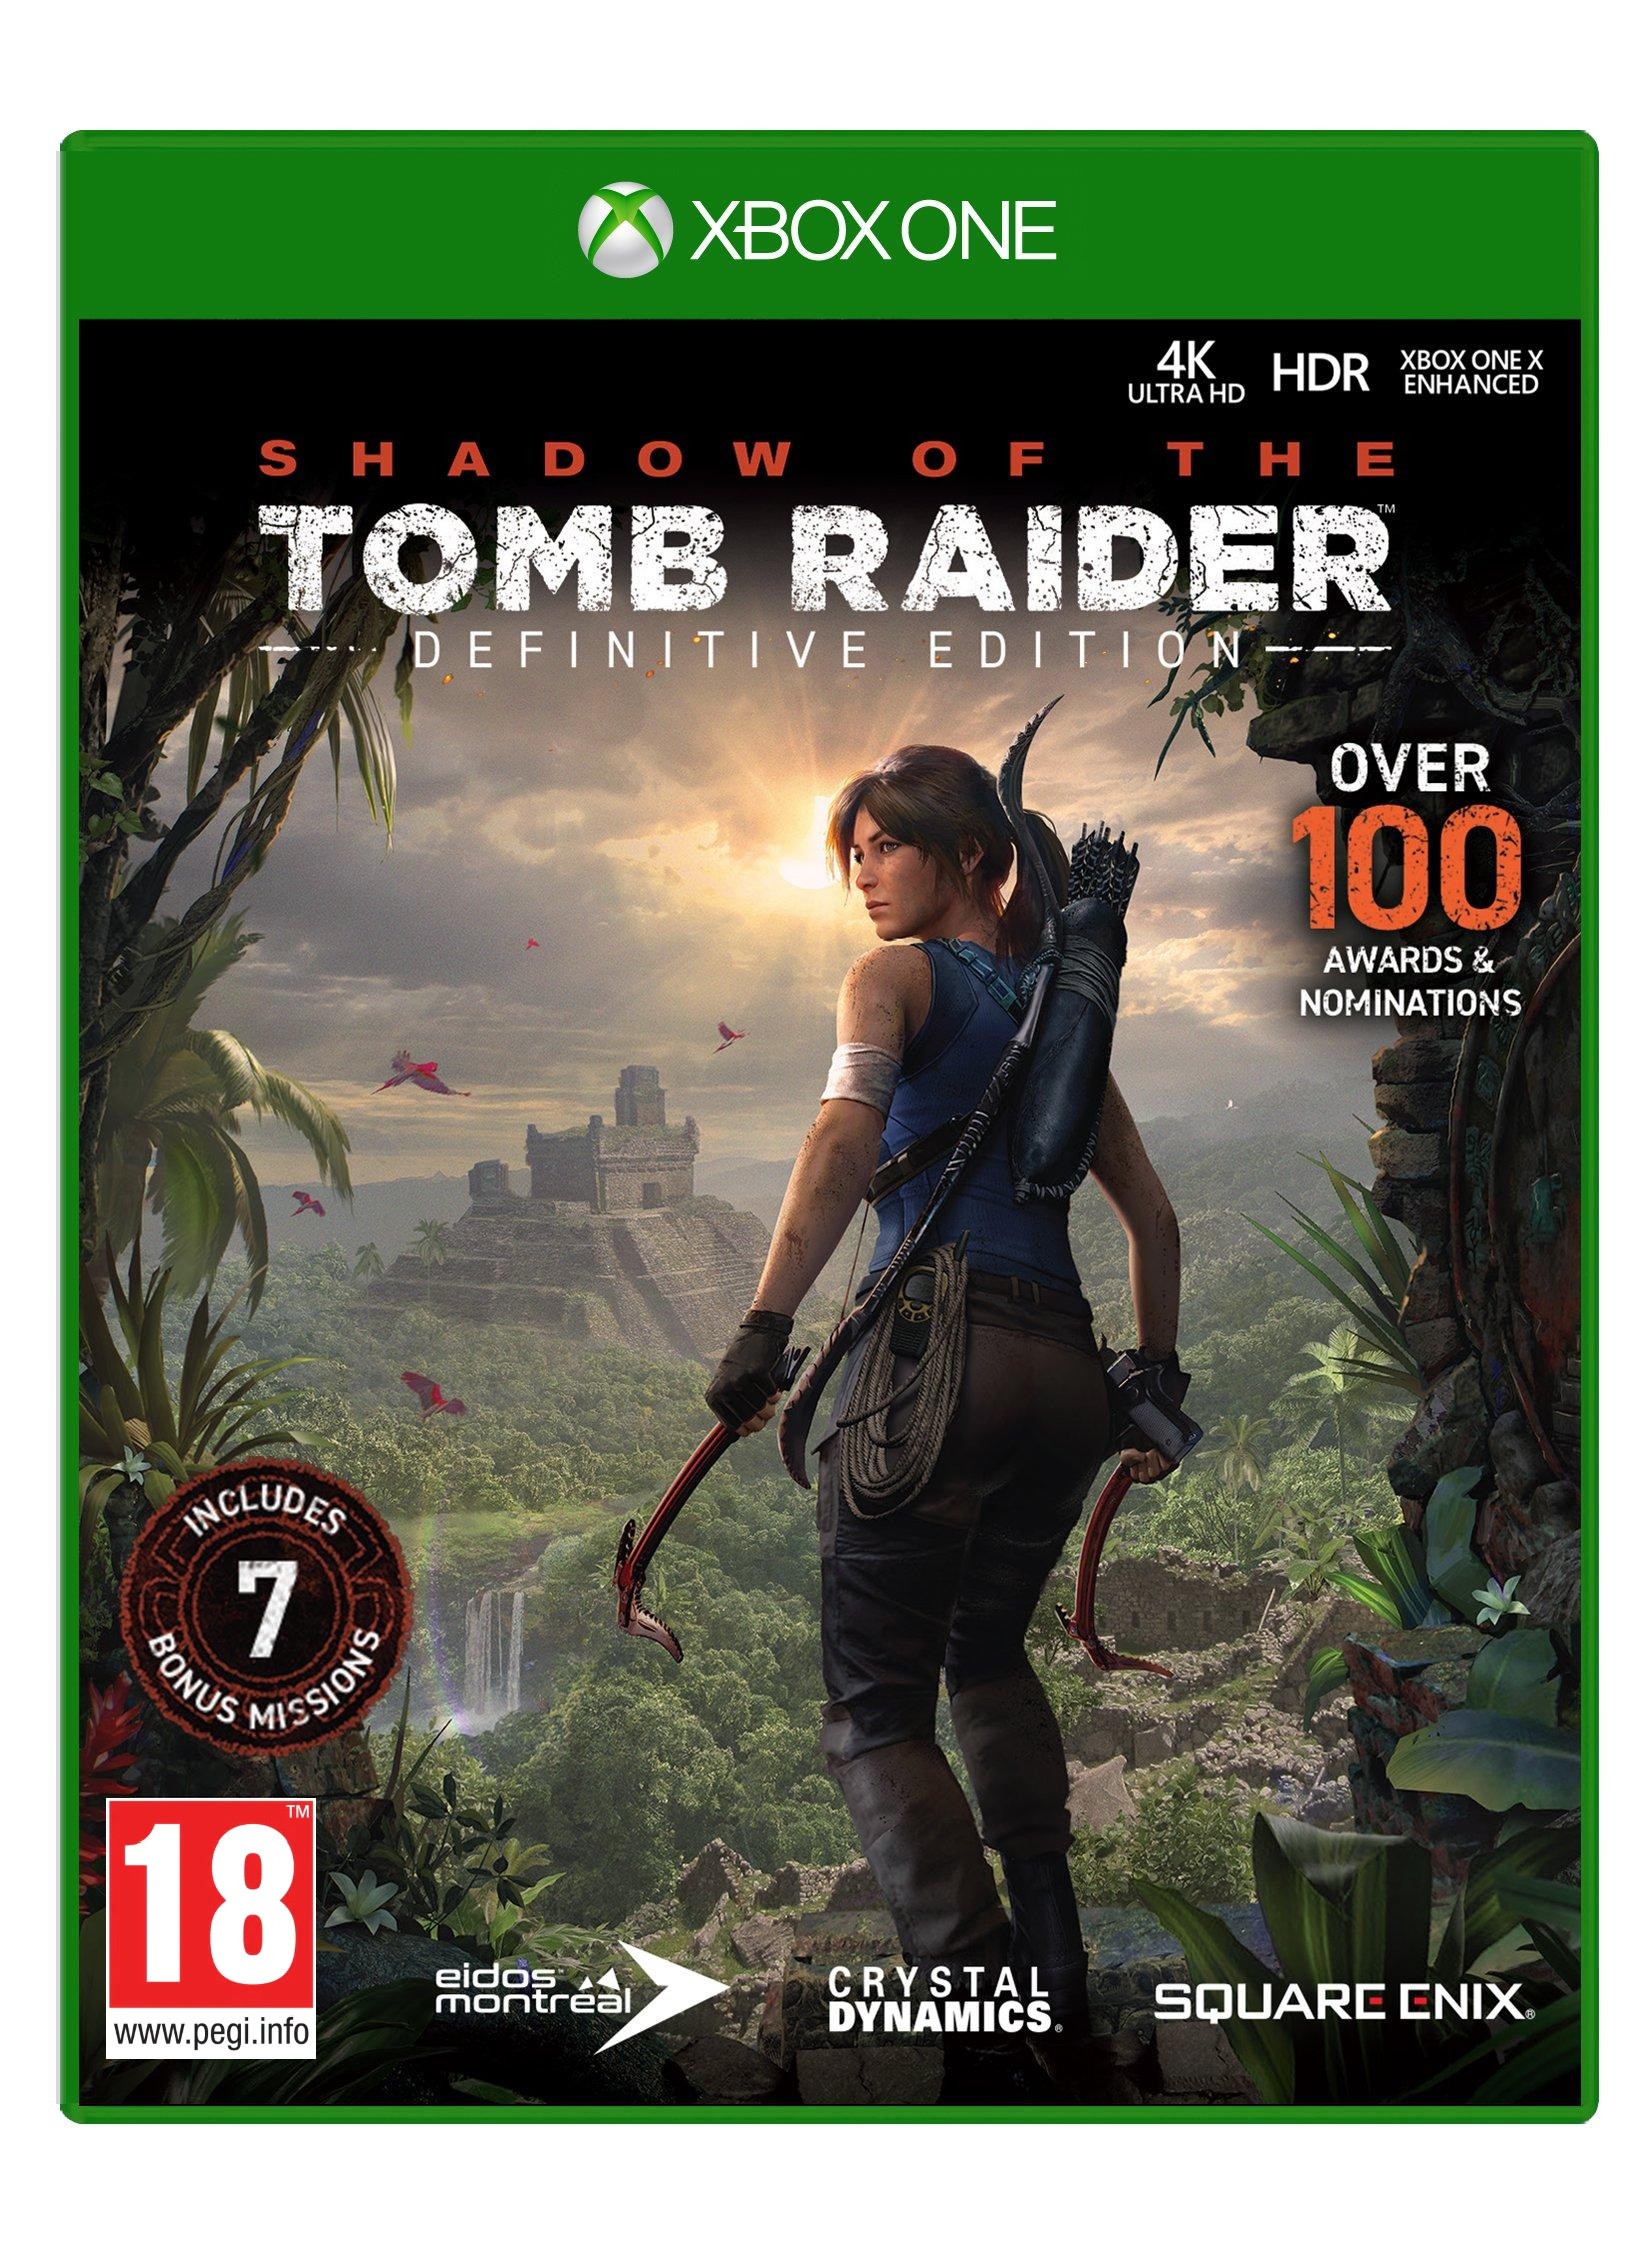 shadow of the tomb raider definitive edition includes